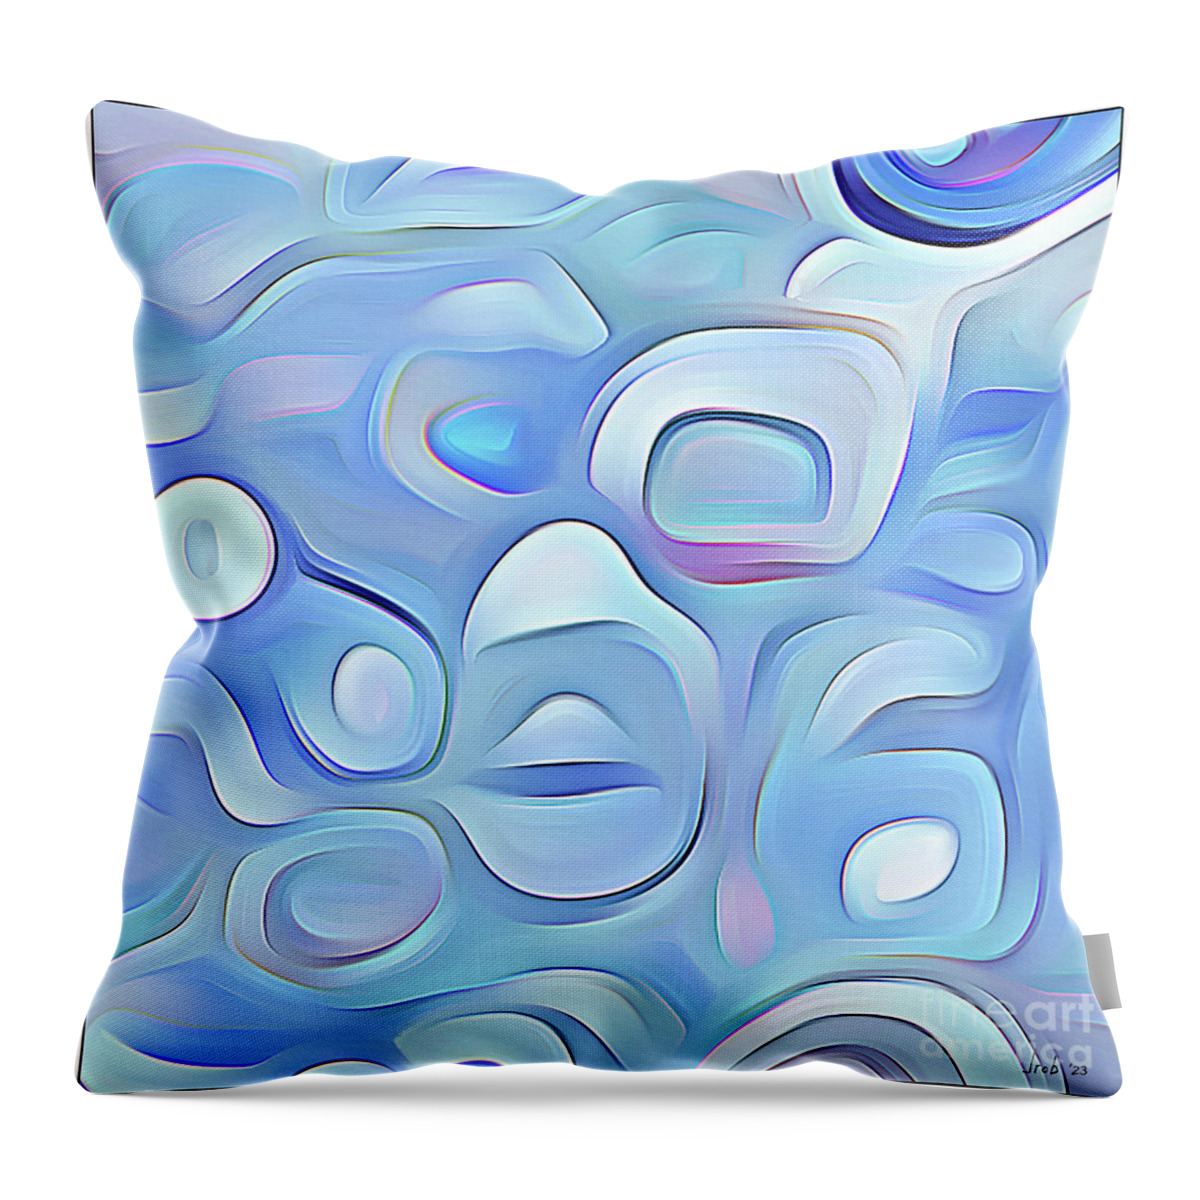 Jrob Abstract Throw Pillow featuring the digital art Late Afternoon Flurries by Jrob Abstract